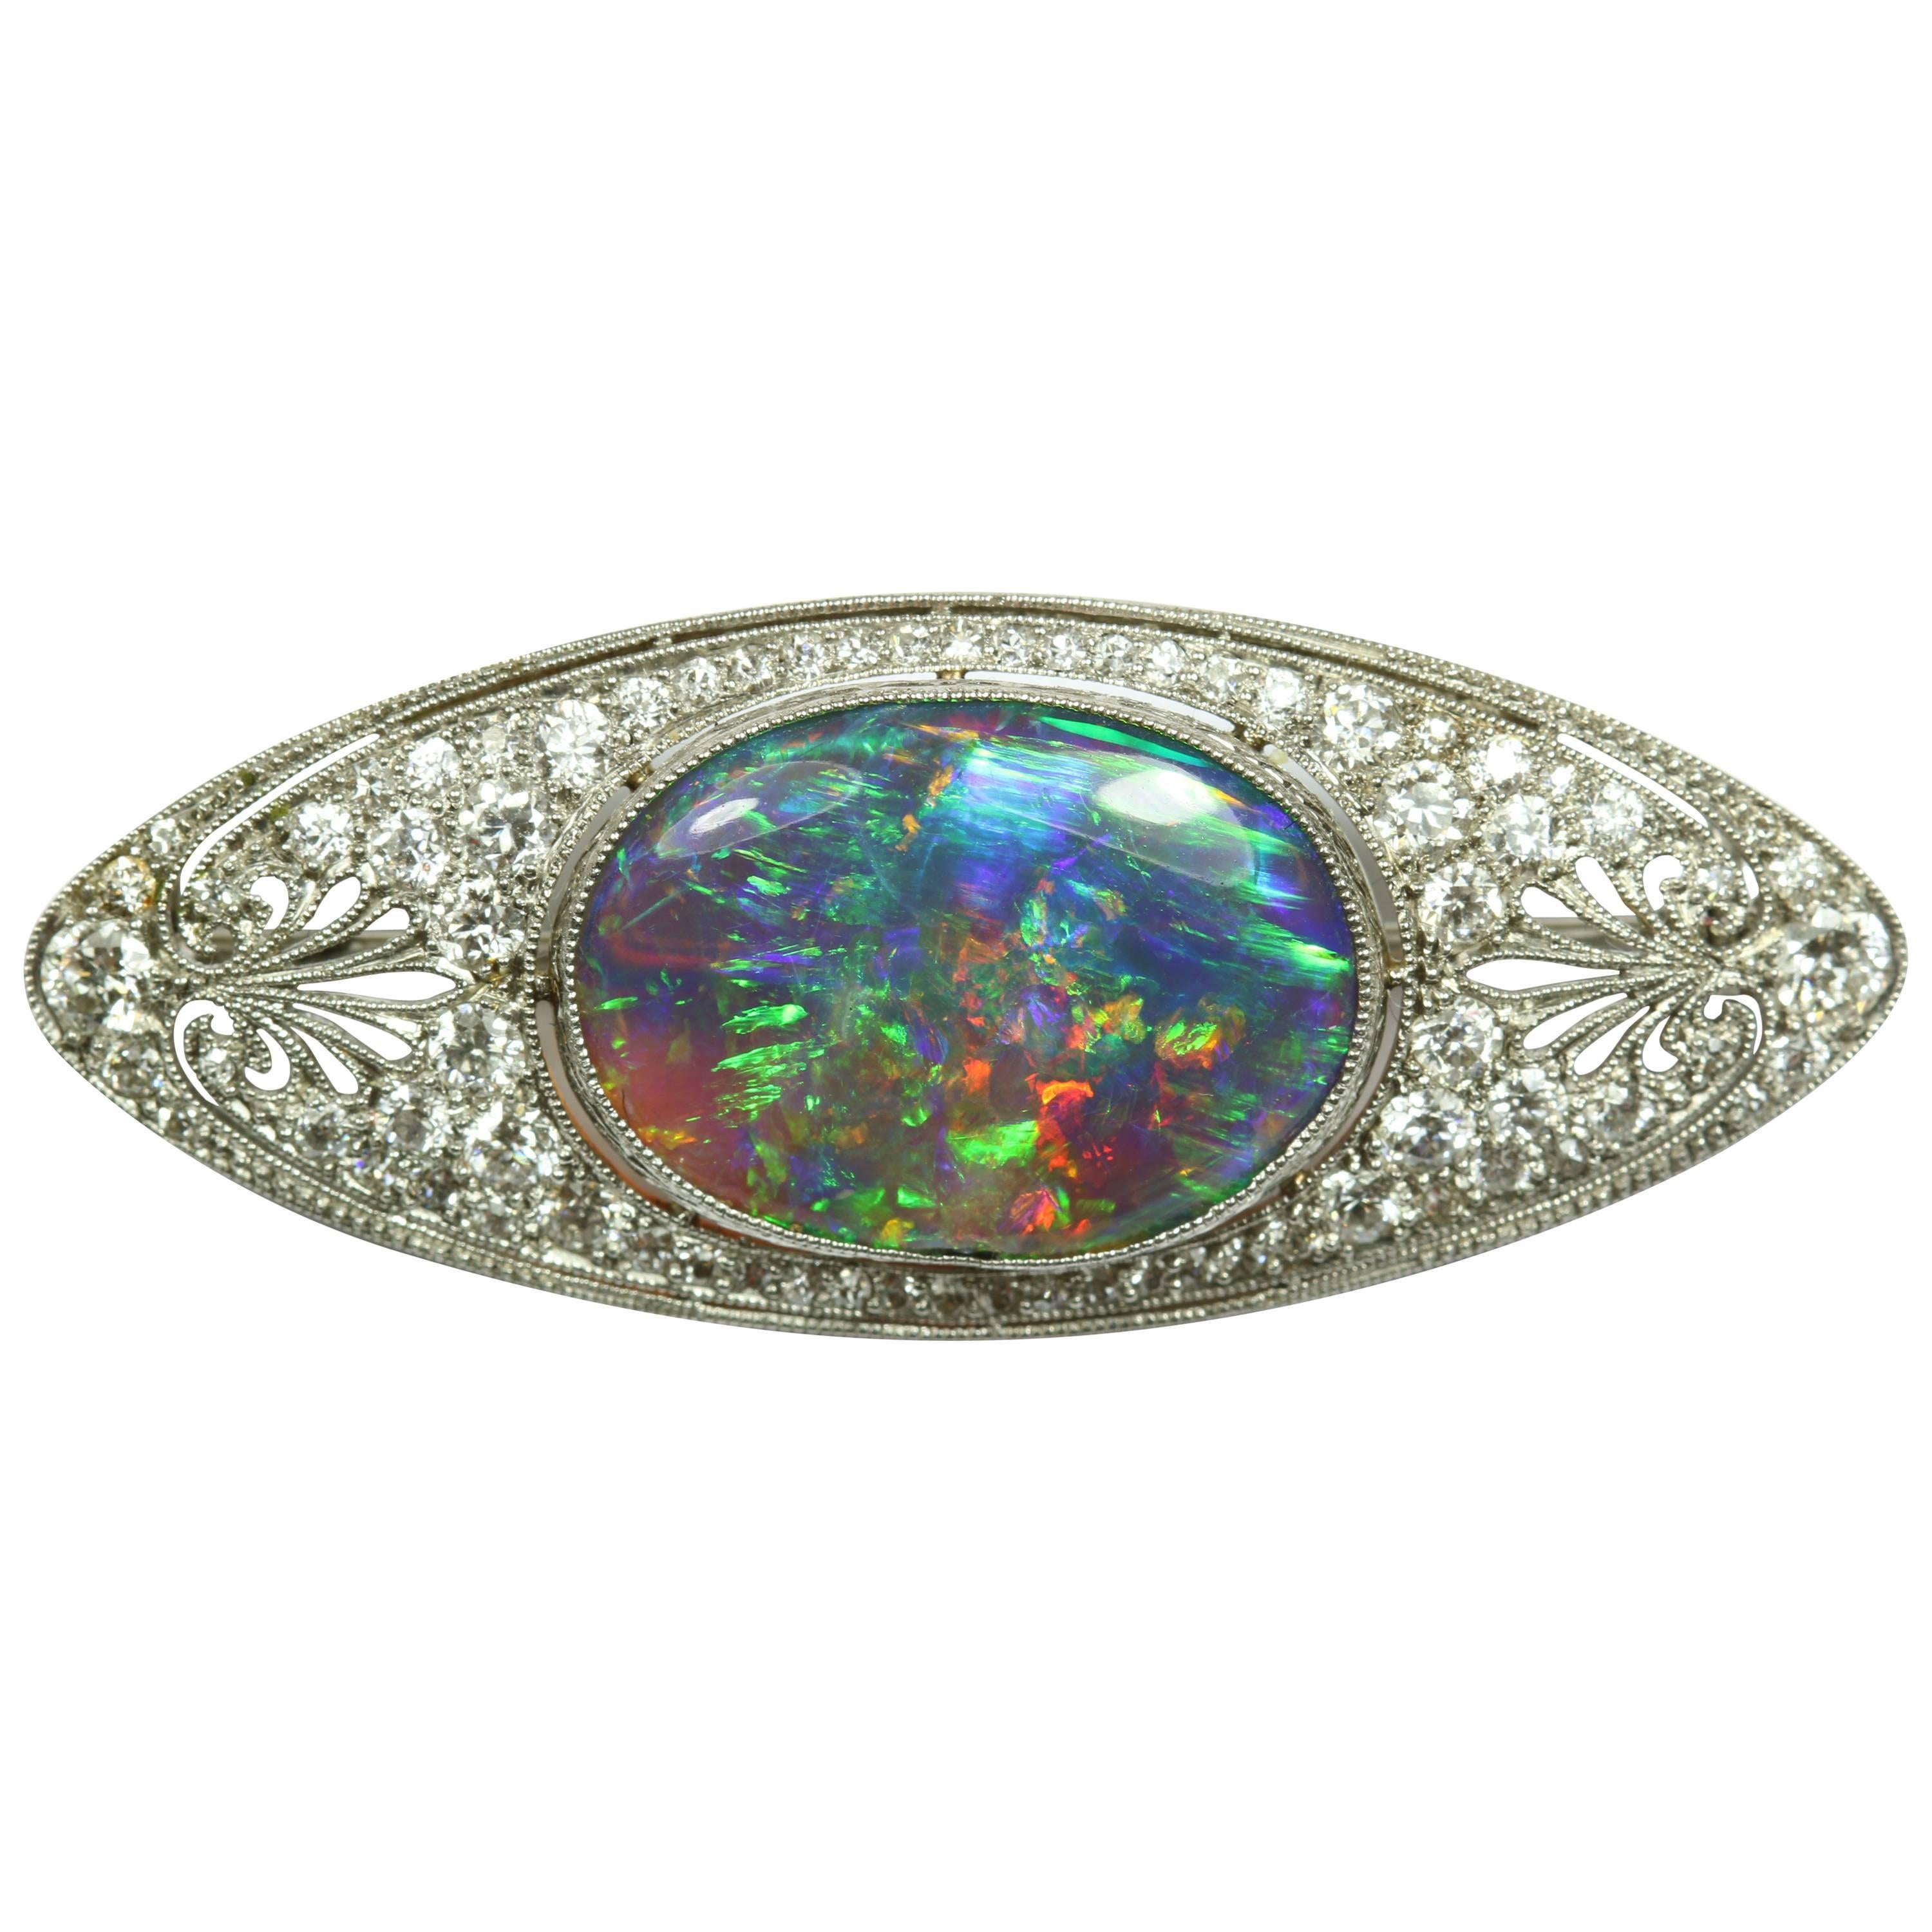 Marcus and Co. Black Opal, Diamond and Platinum Brooch, 1917